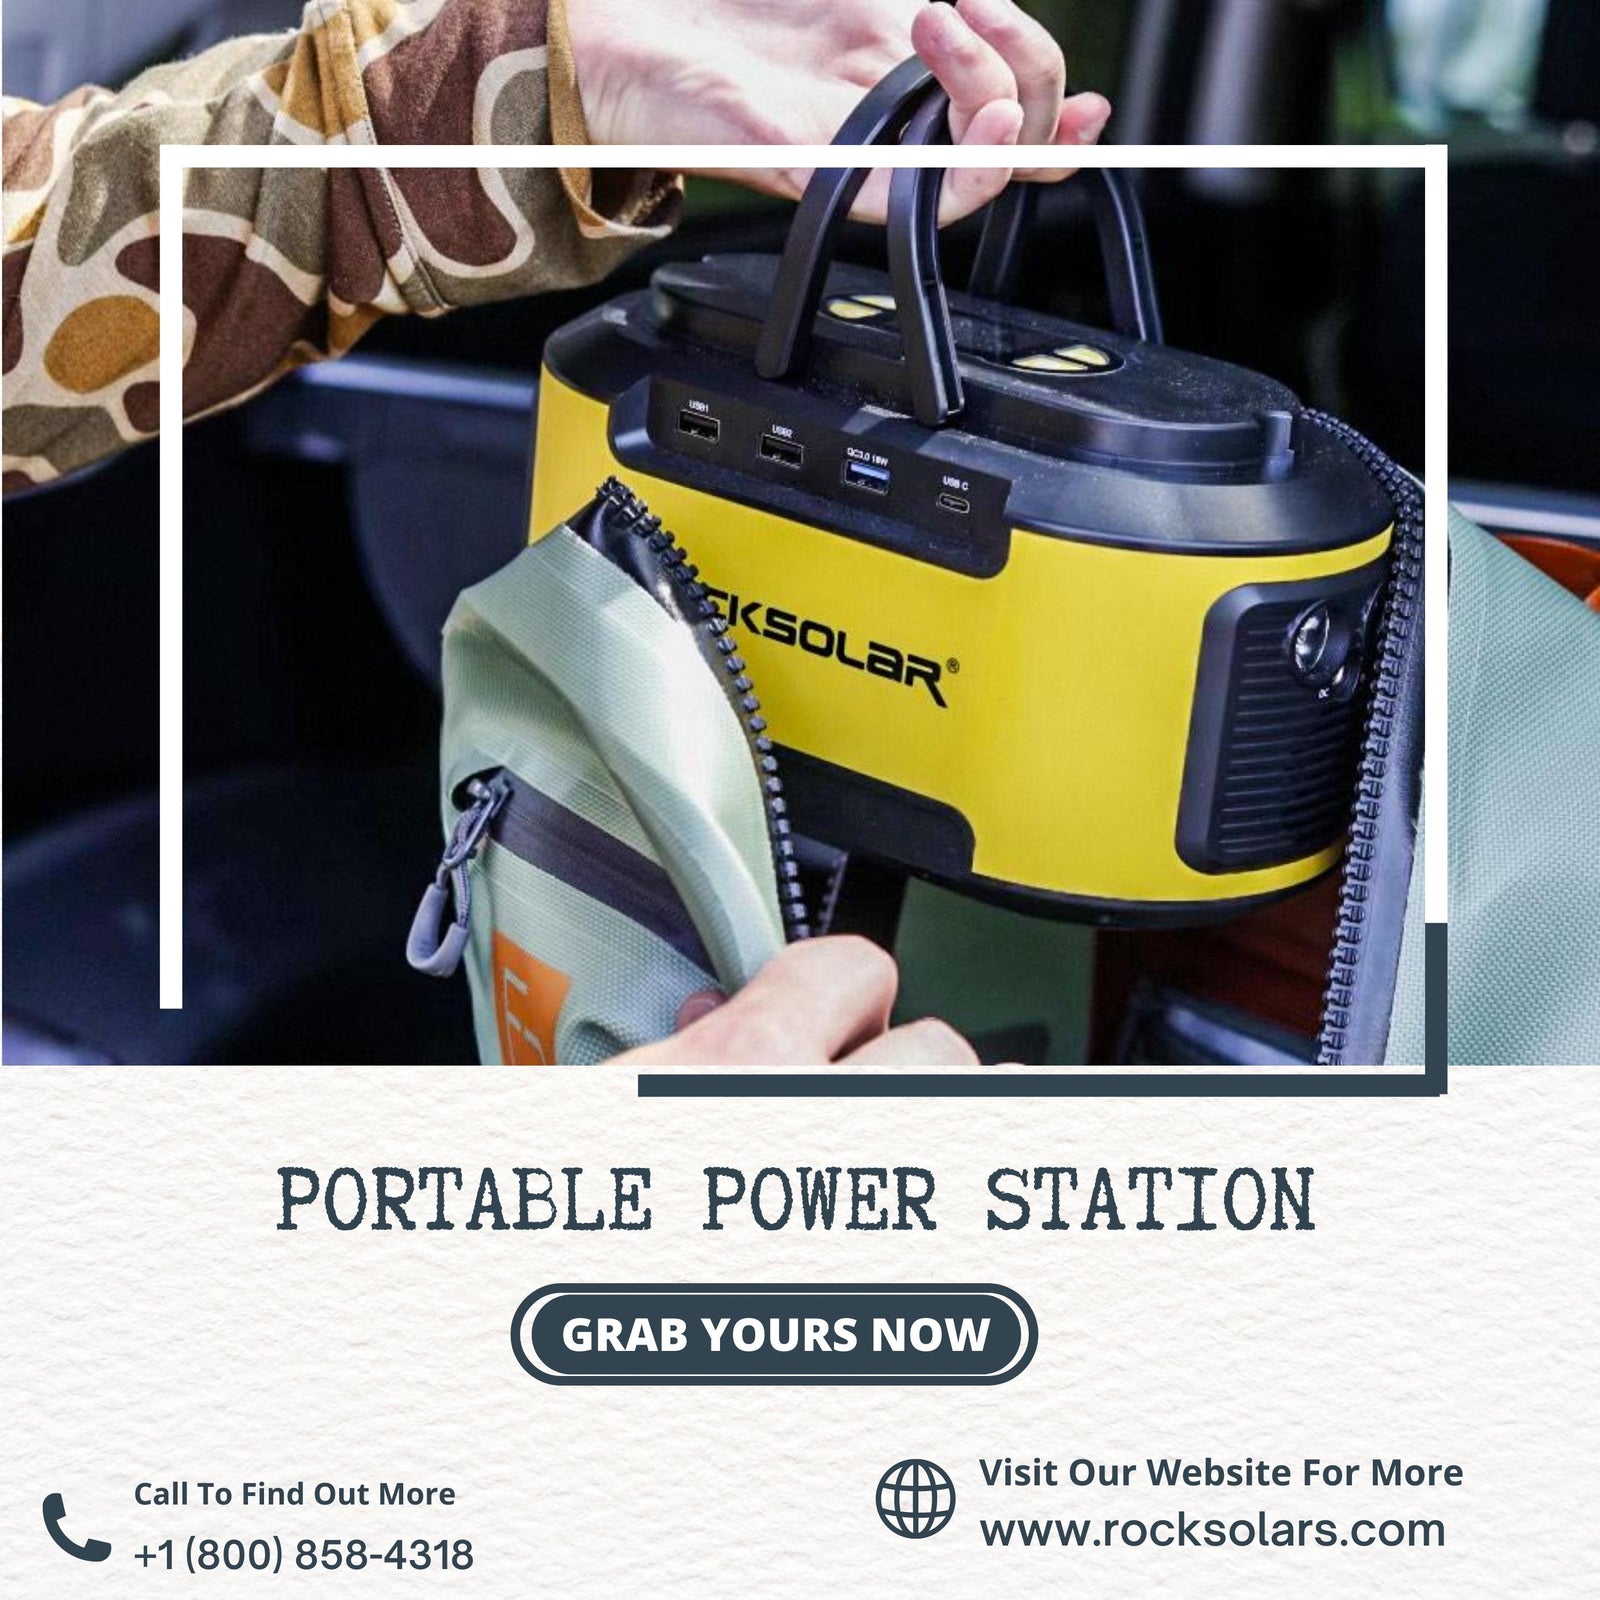 How to use a Portable Power Station